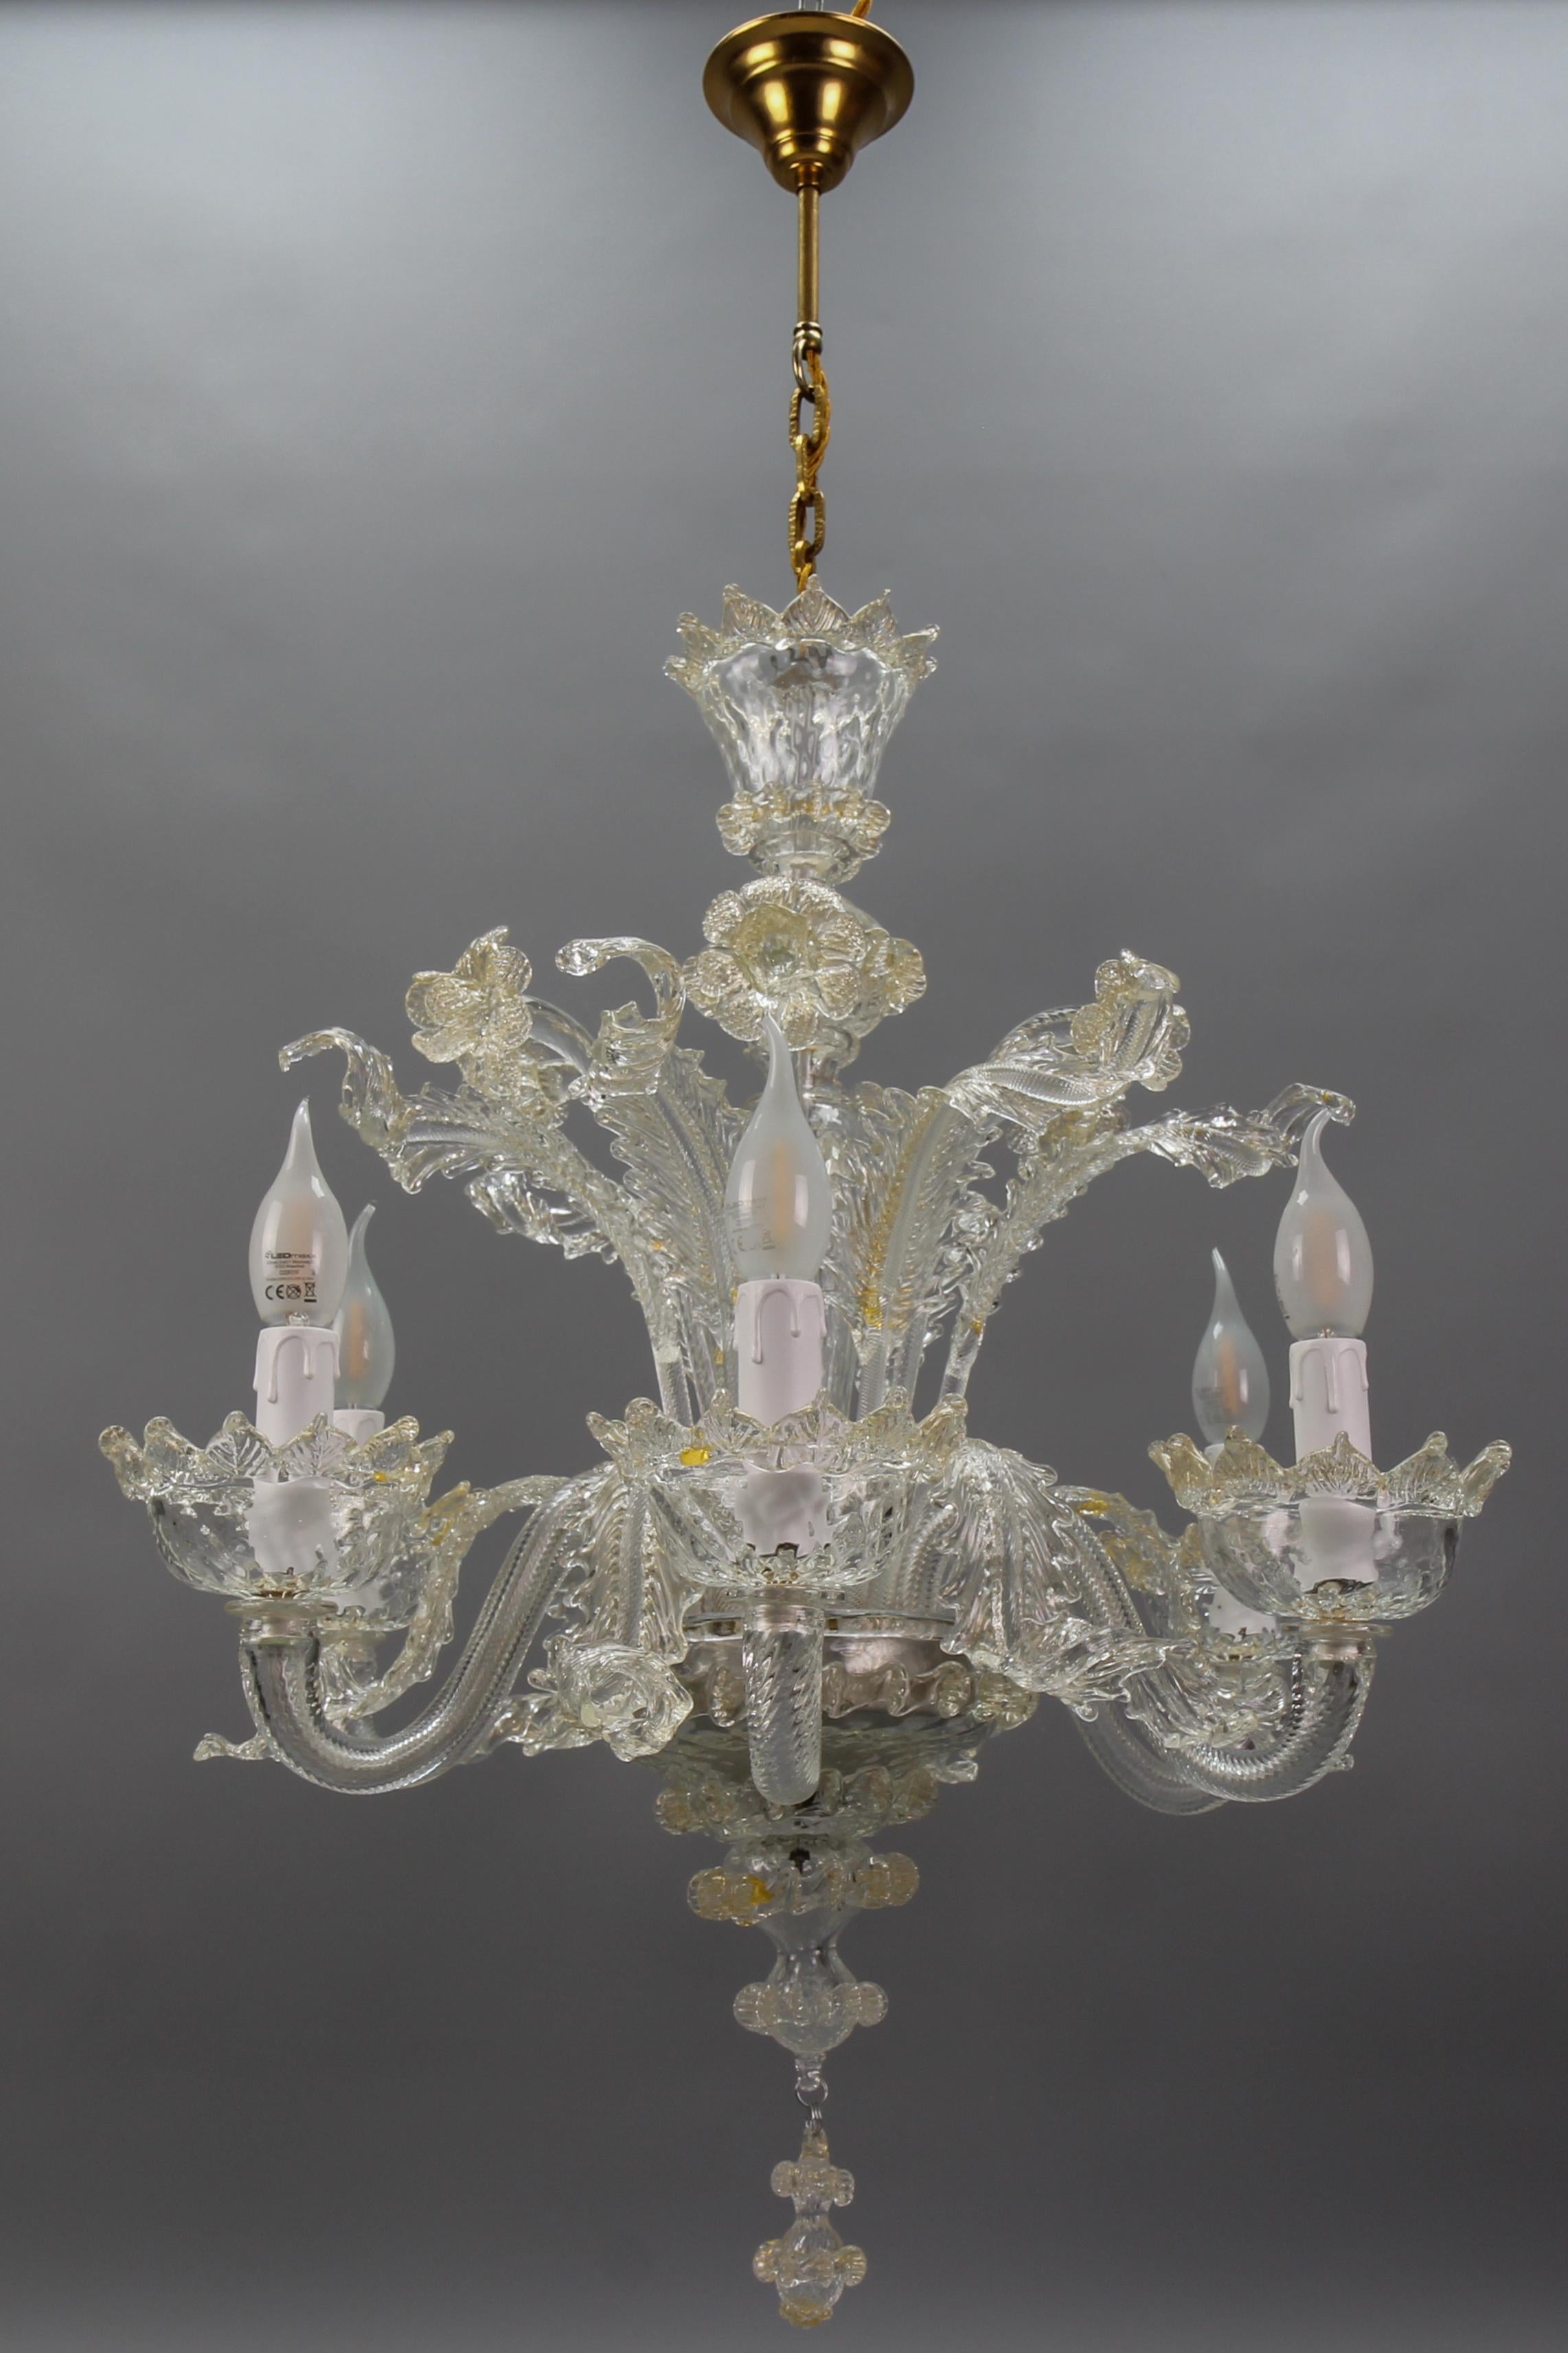 Baroque Italian Venetian Murano Clear Glass and Gold Dust Floral Six-Light Chandelier For Sale